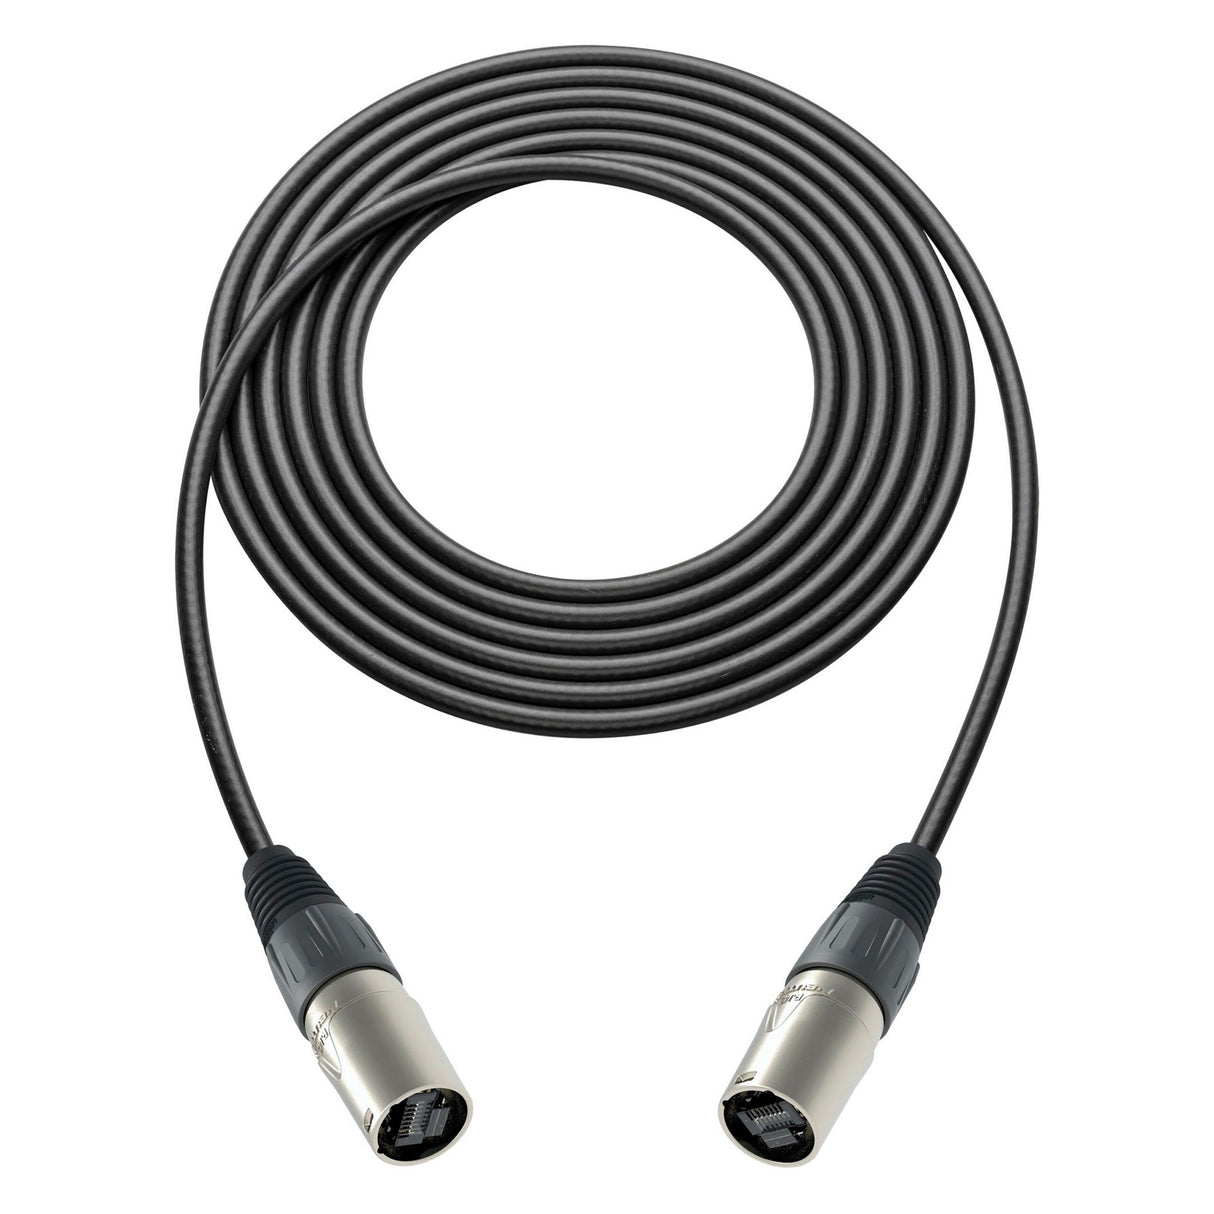 Laird CAT5e Extreme Cable with Belden 7923A DataTuff Cable and Neutrik etherCON Connectors, 150 Foot